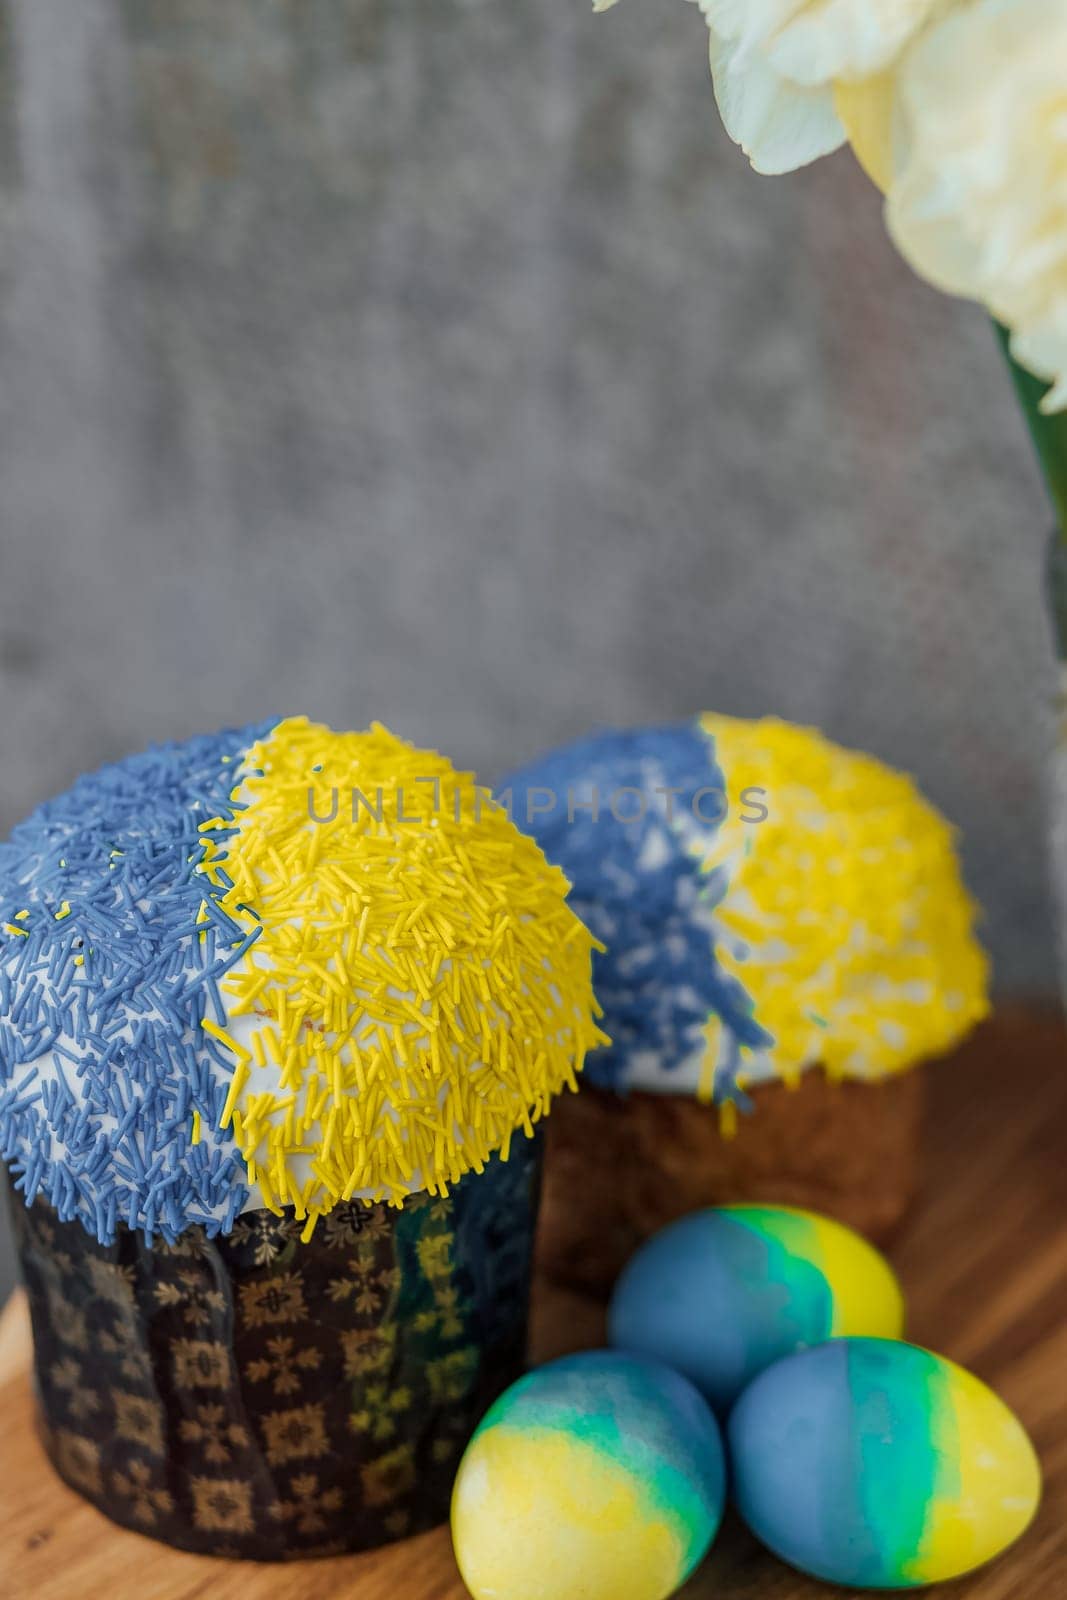 Delicious Easter cakes in the colors of the flag of Ukraine, yellow-blue colored Easter eggs on a wooden table with flowers in the background. place for text. selective focus. by Anyatachka